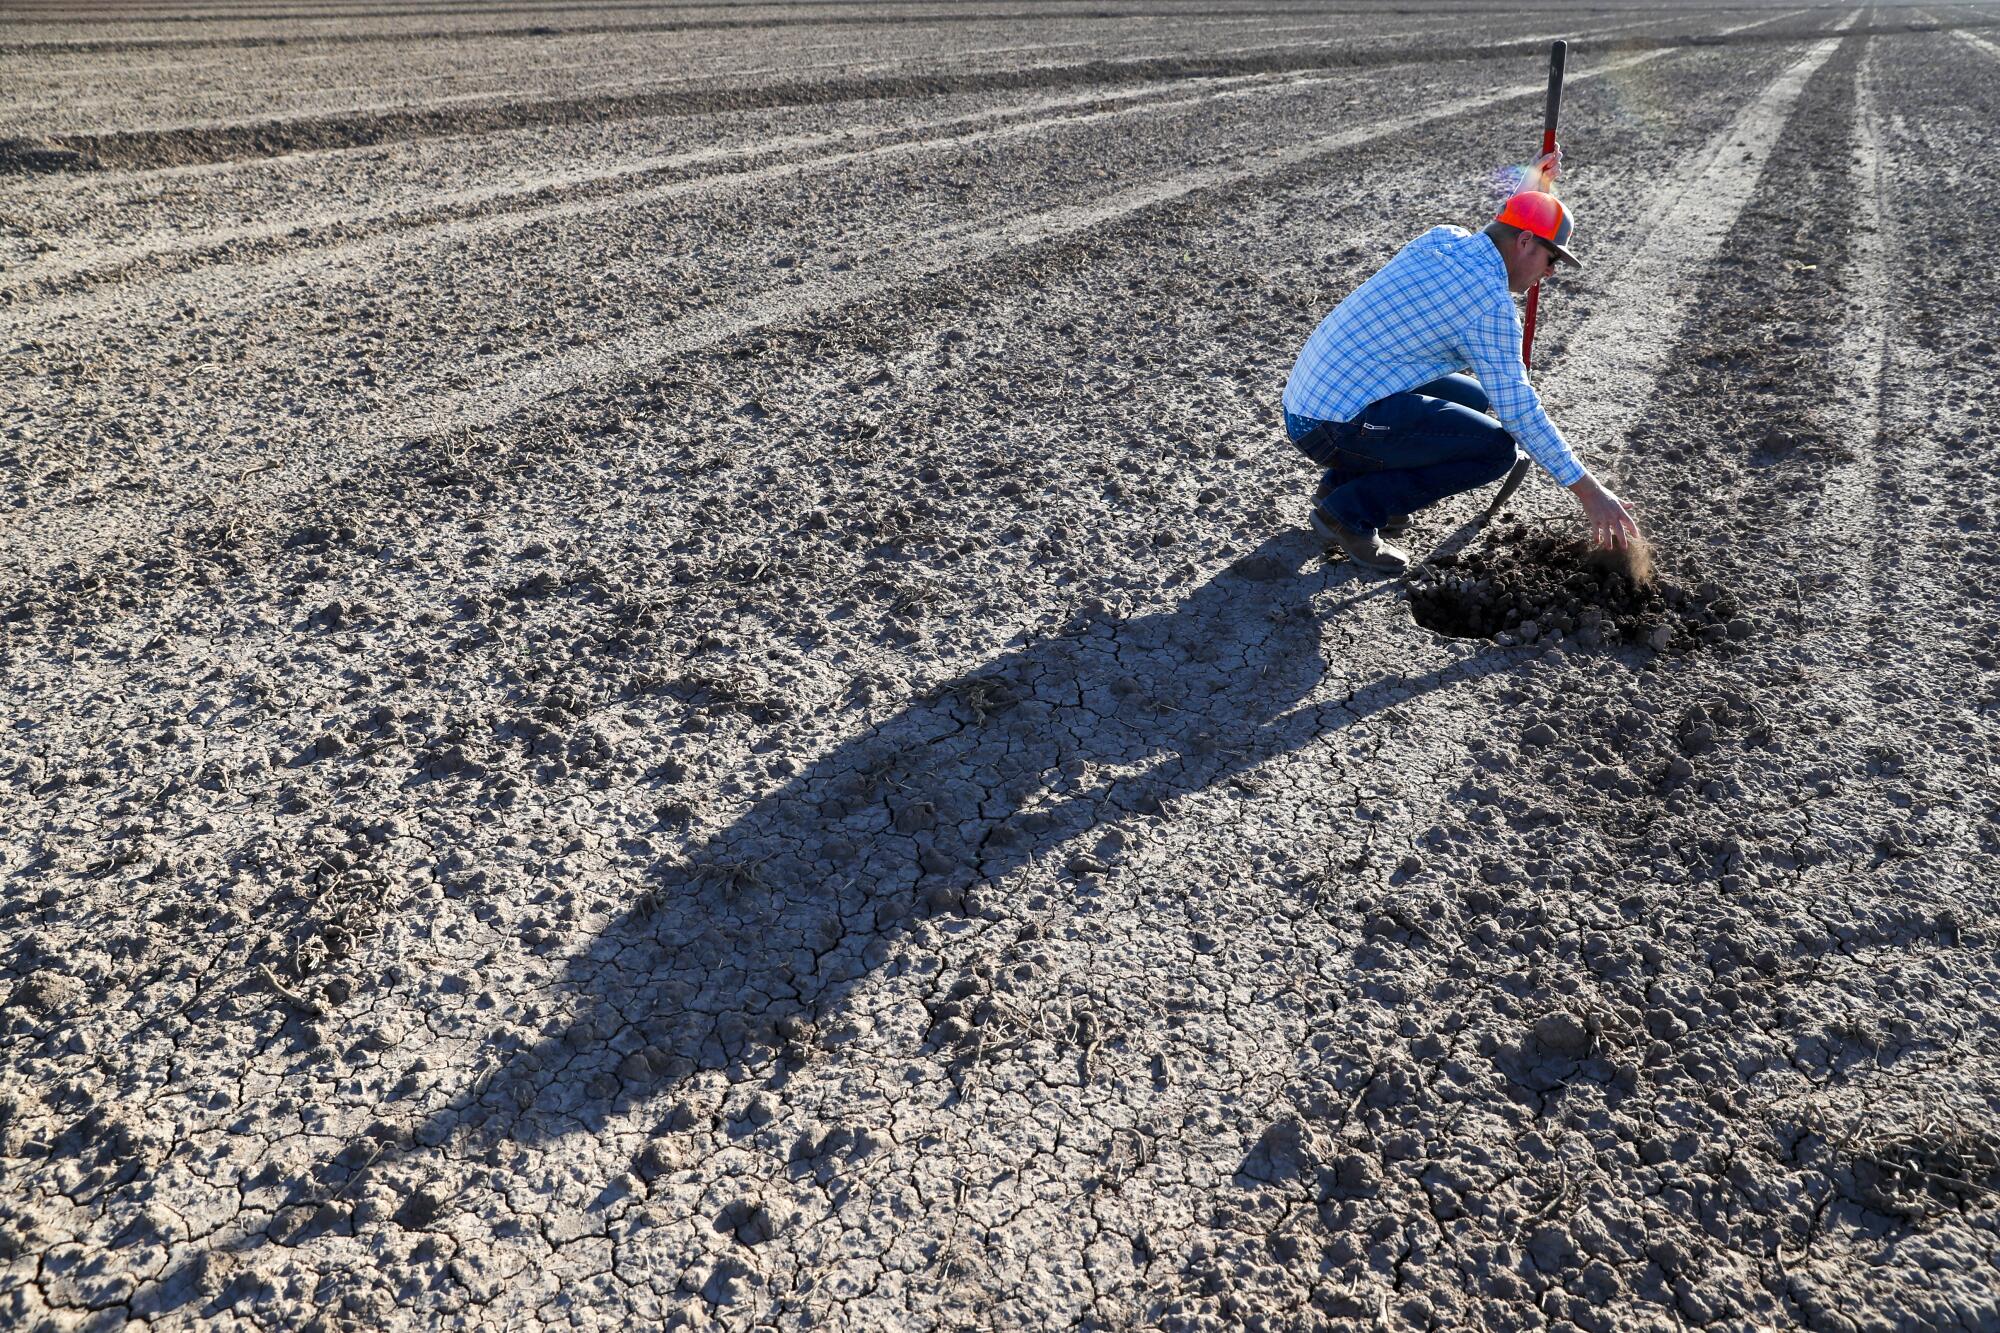 Imperial Valley farmer Trevor Tagg digs into the soil at one of his alfalfa plots.